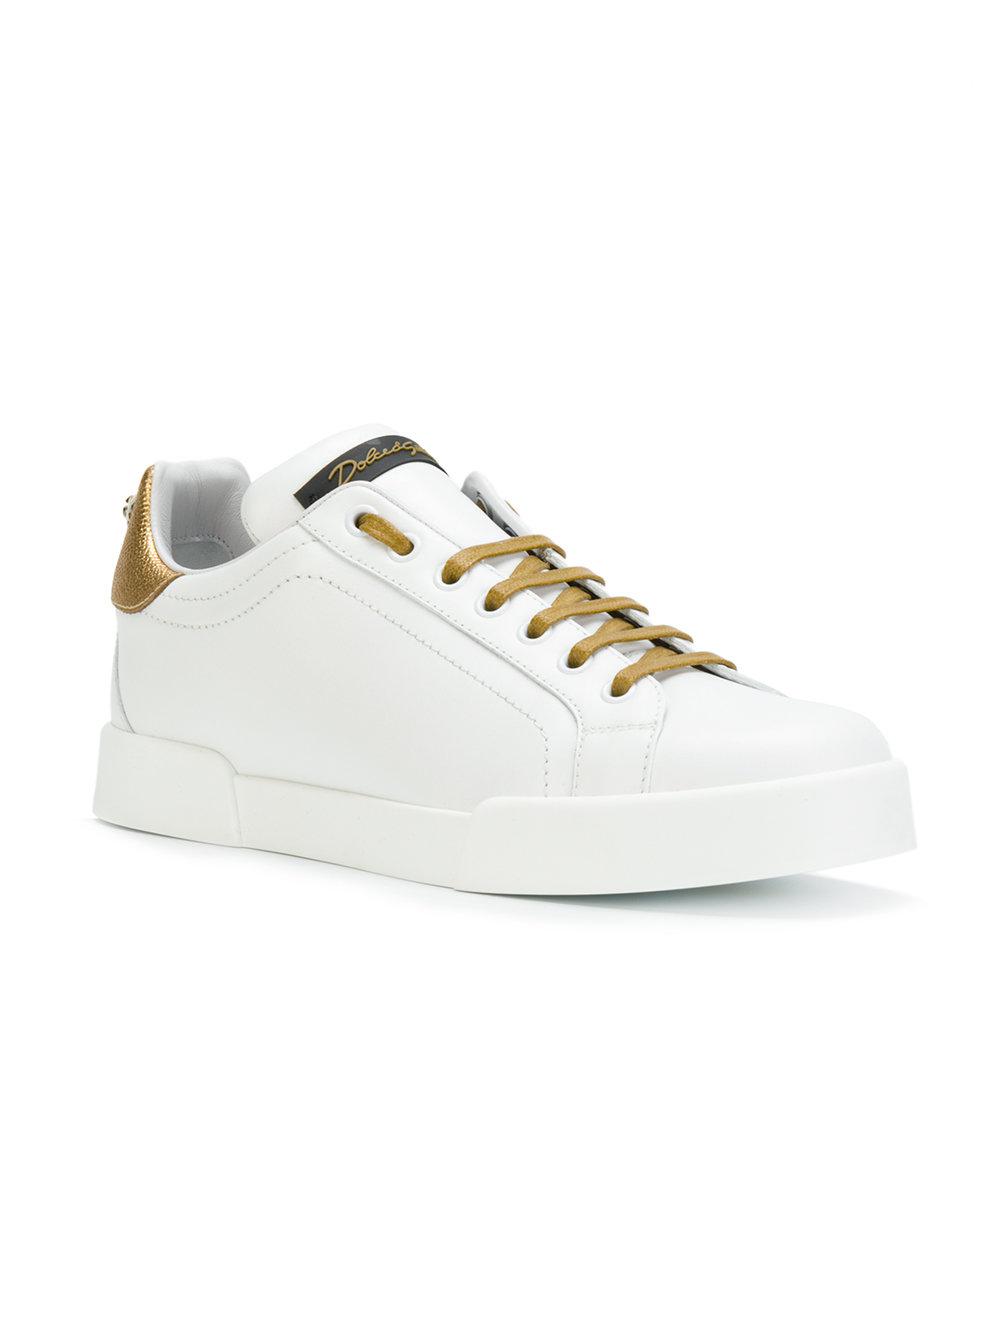 Dolce & Gabbana Leather Low Top Sneakers in White - Lyst